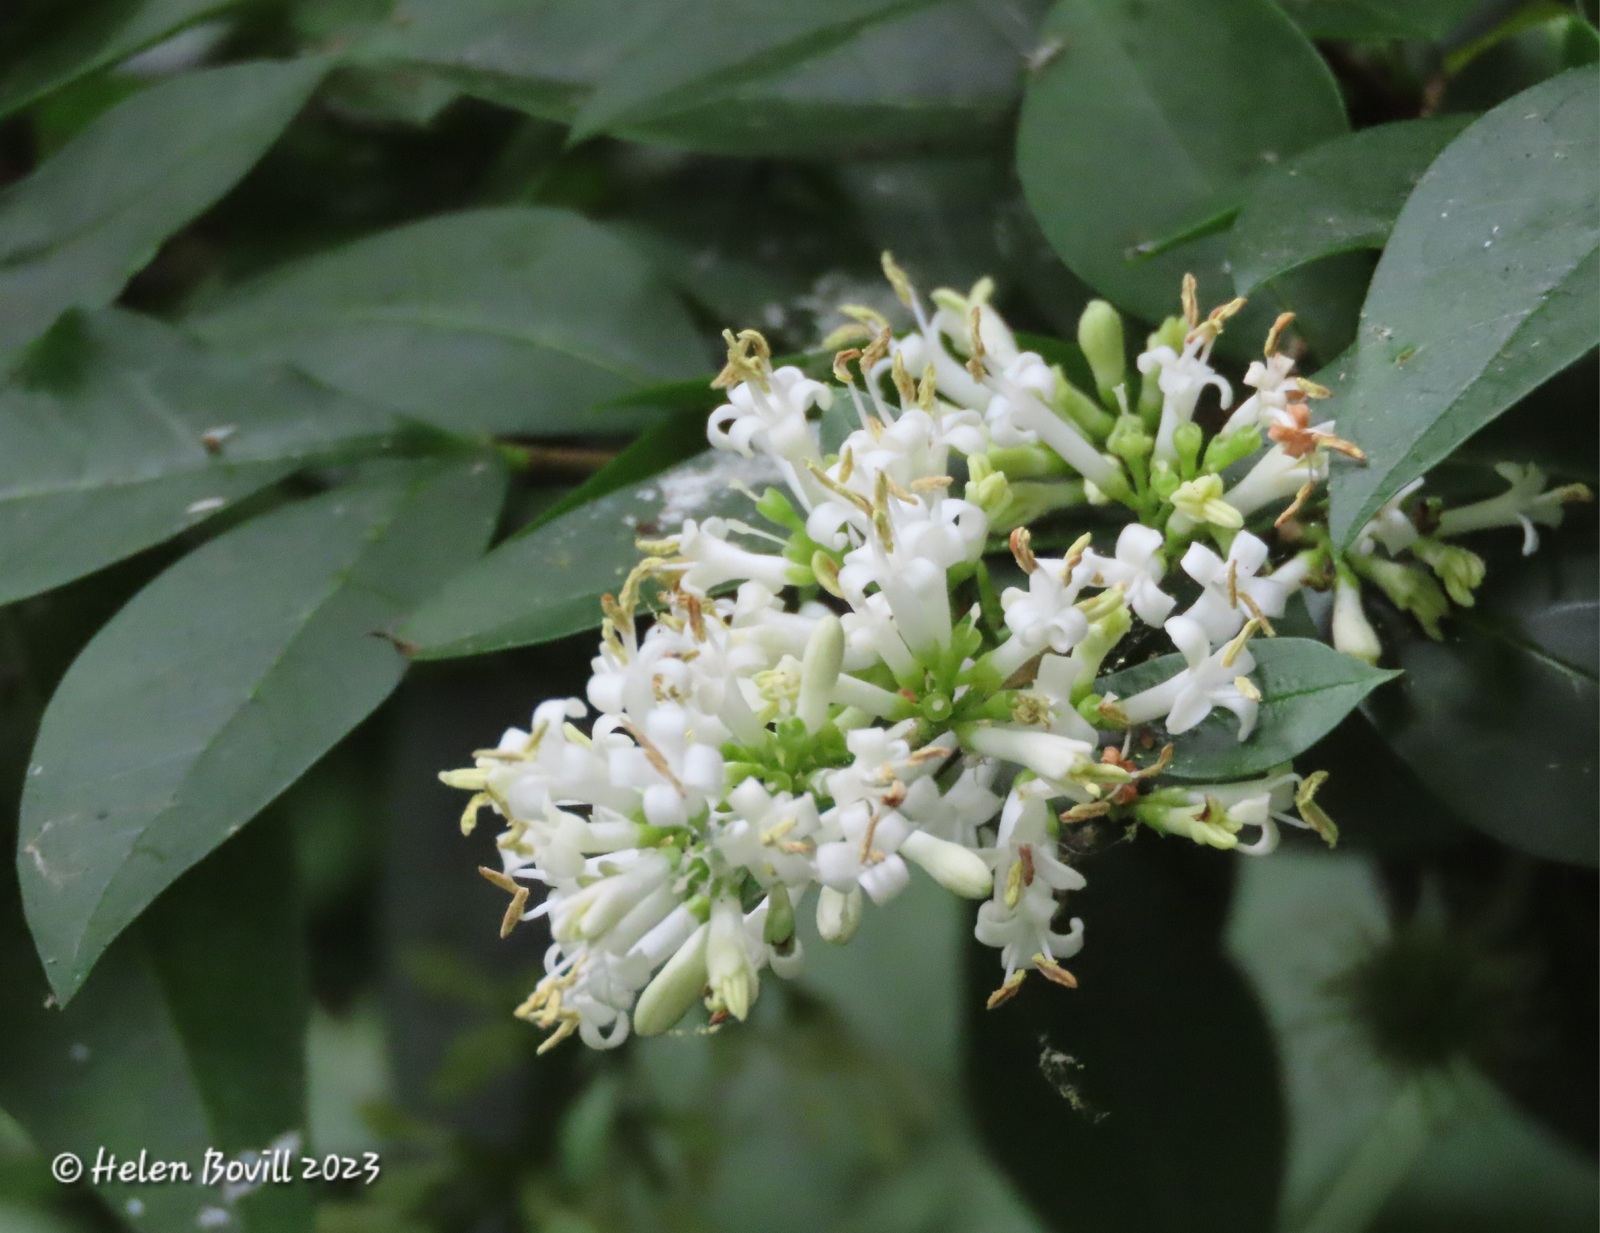 The white flowers of the Privet growing in the cemetery